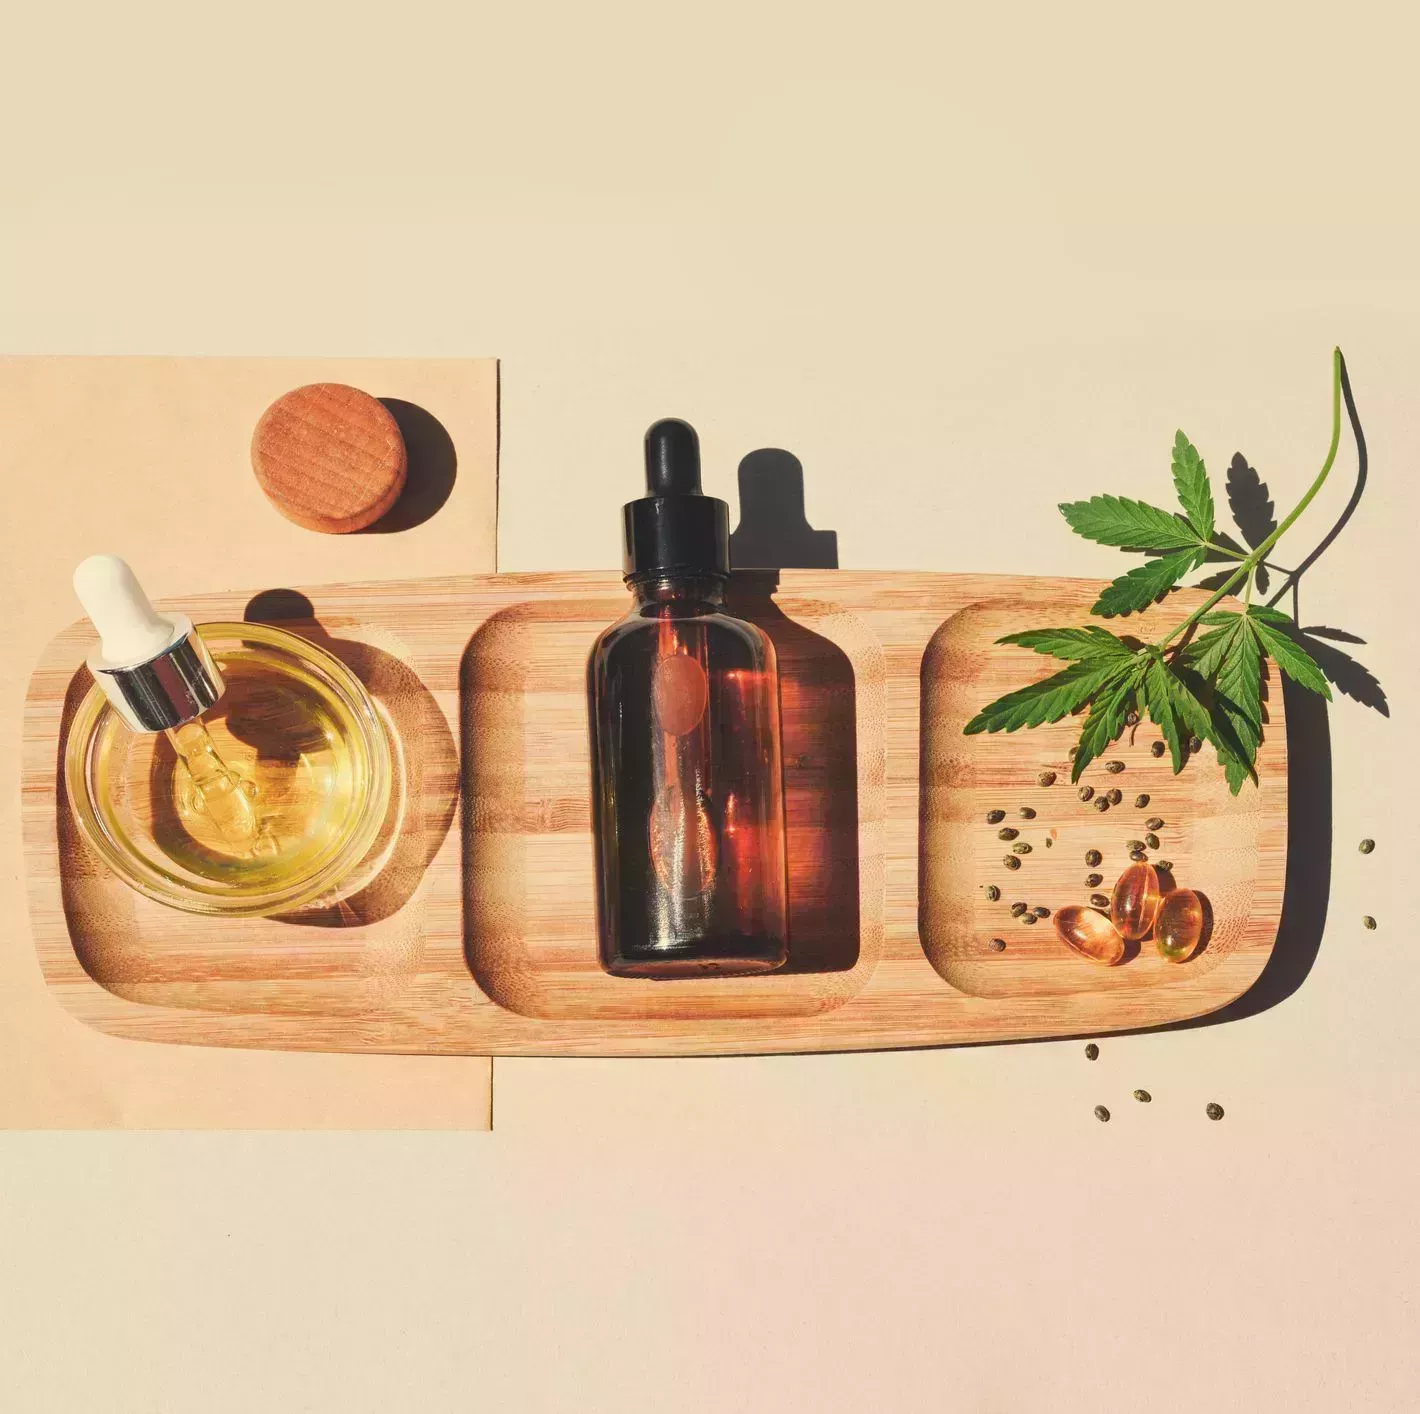 cbd oil, tincture with marijuana leaves on a beige background cannabis seeds in a wooden spoon medical cannabis concept for health and cosmetics minimalism